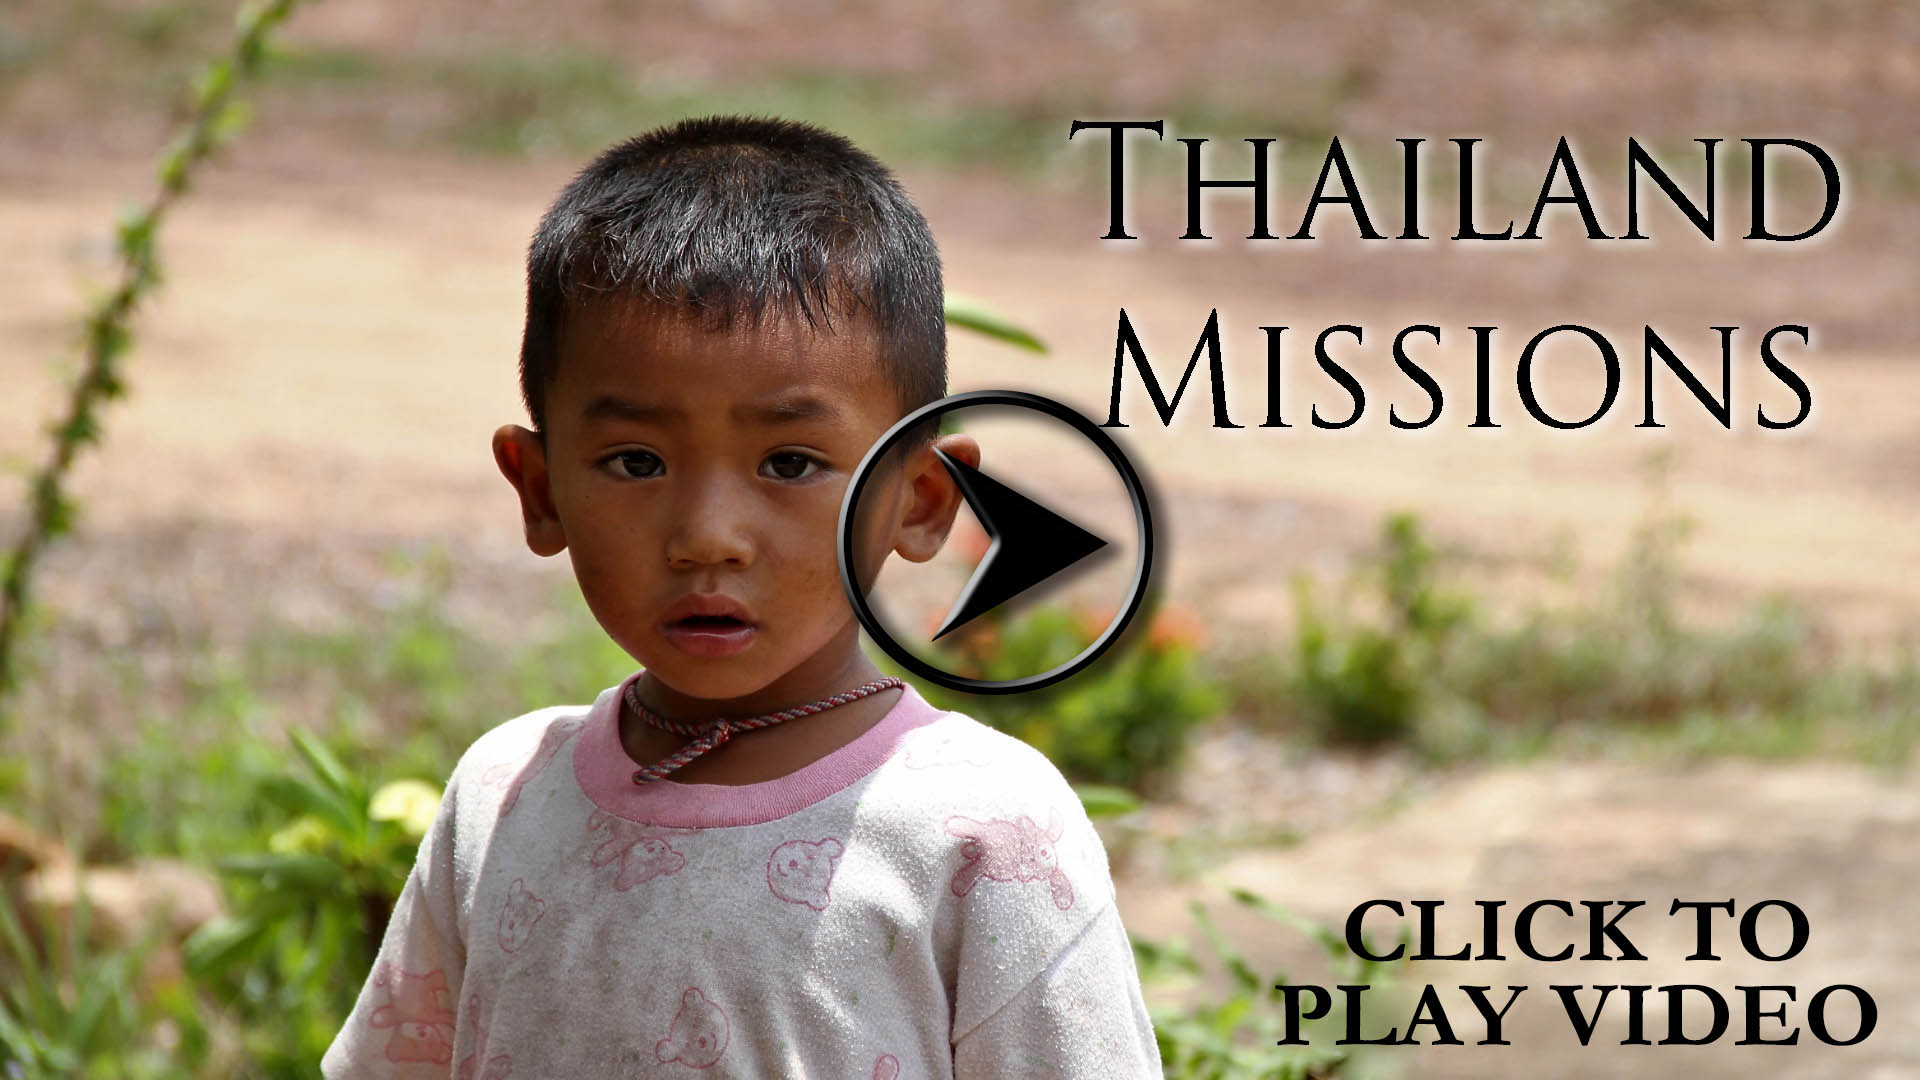 Thailand Missions Video 2015